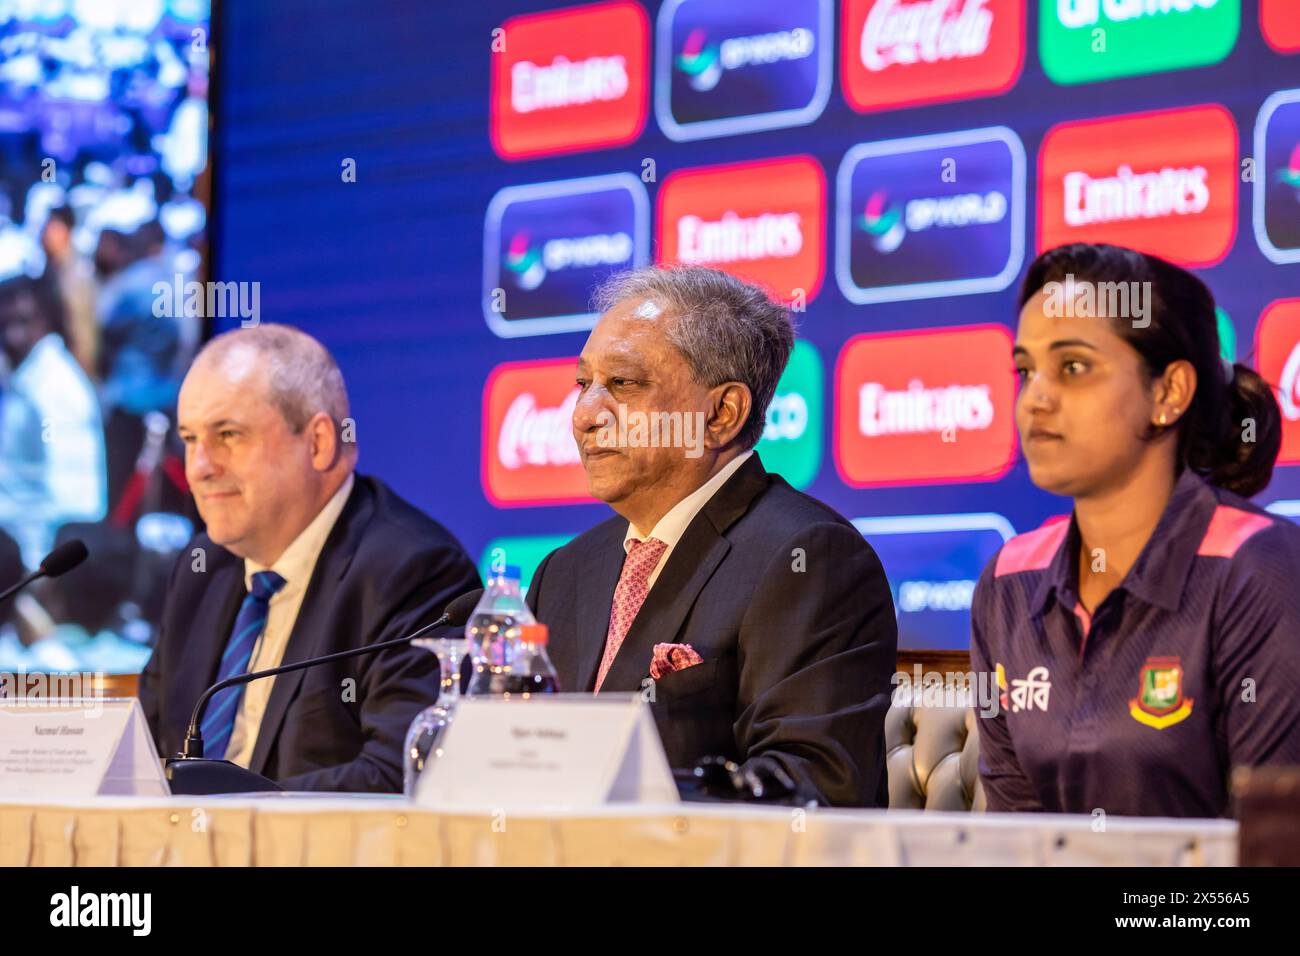 L-R ICC CEO Geoff Allardice, Minister for Youth & Sports and BCB President, Nazmul Hassan, and Women's Team Captain of Bangladesh, Nigar Sultana Joty seen during a press conference held at the Pan Pacific Sonargaon, Dhaka. The 2024 ICC Women's T20 World Cup is scheduled to be the ninth edition of ICC Women's T20 World Cup tournament. It is scheduled to be hosted in Bangladesh from 3 to 20 October 2024. Australia are the defending champions having defeated South Africa in final of the previous edition. (Photo by Sazzad Hossain / SOPA Images/Sipa USA) Stock Photo